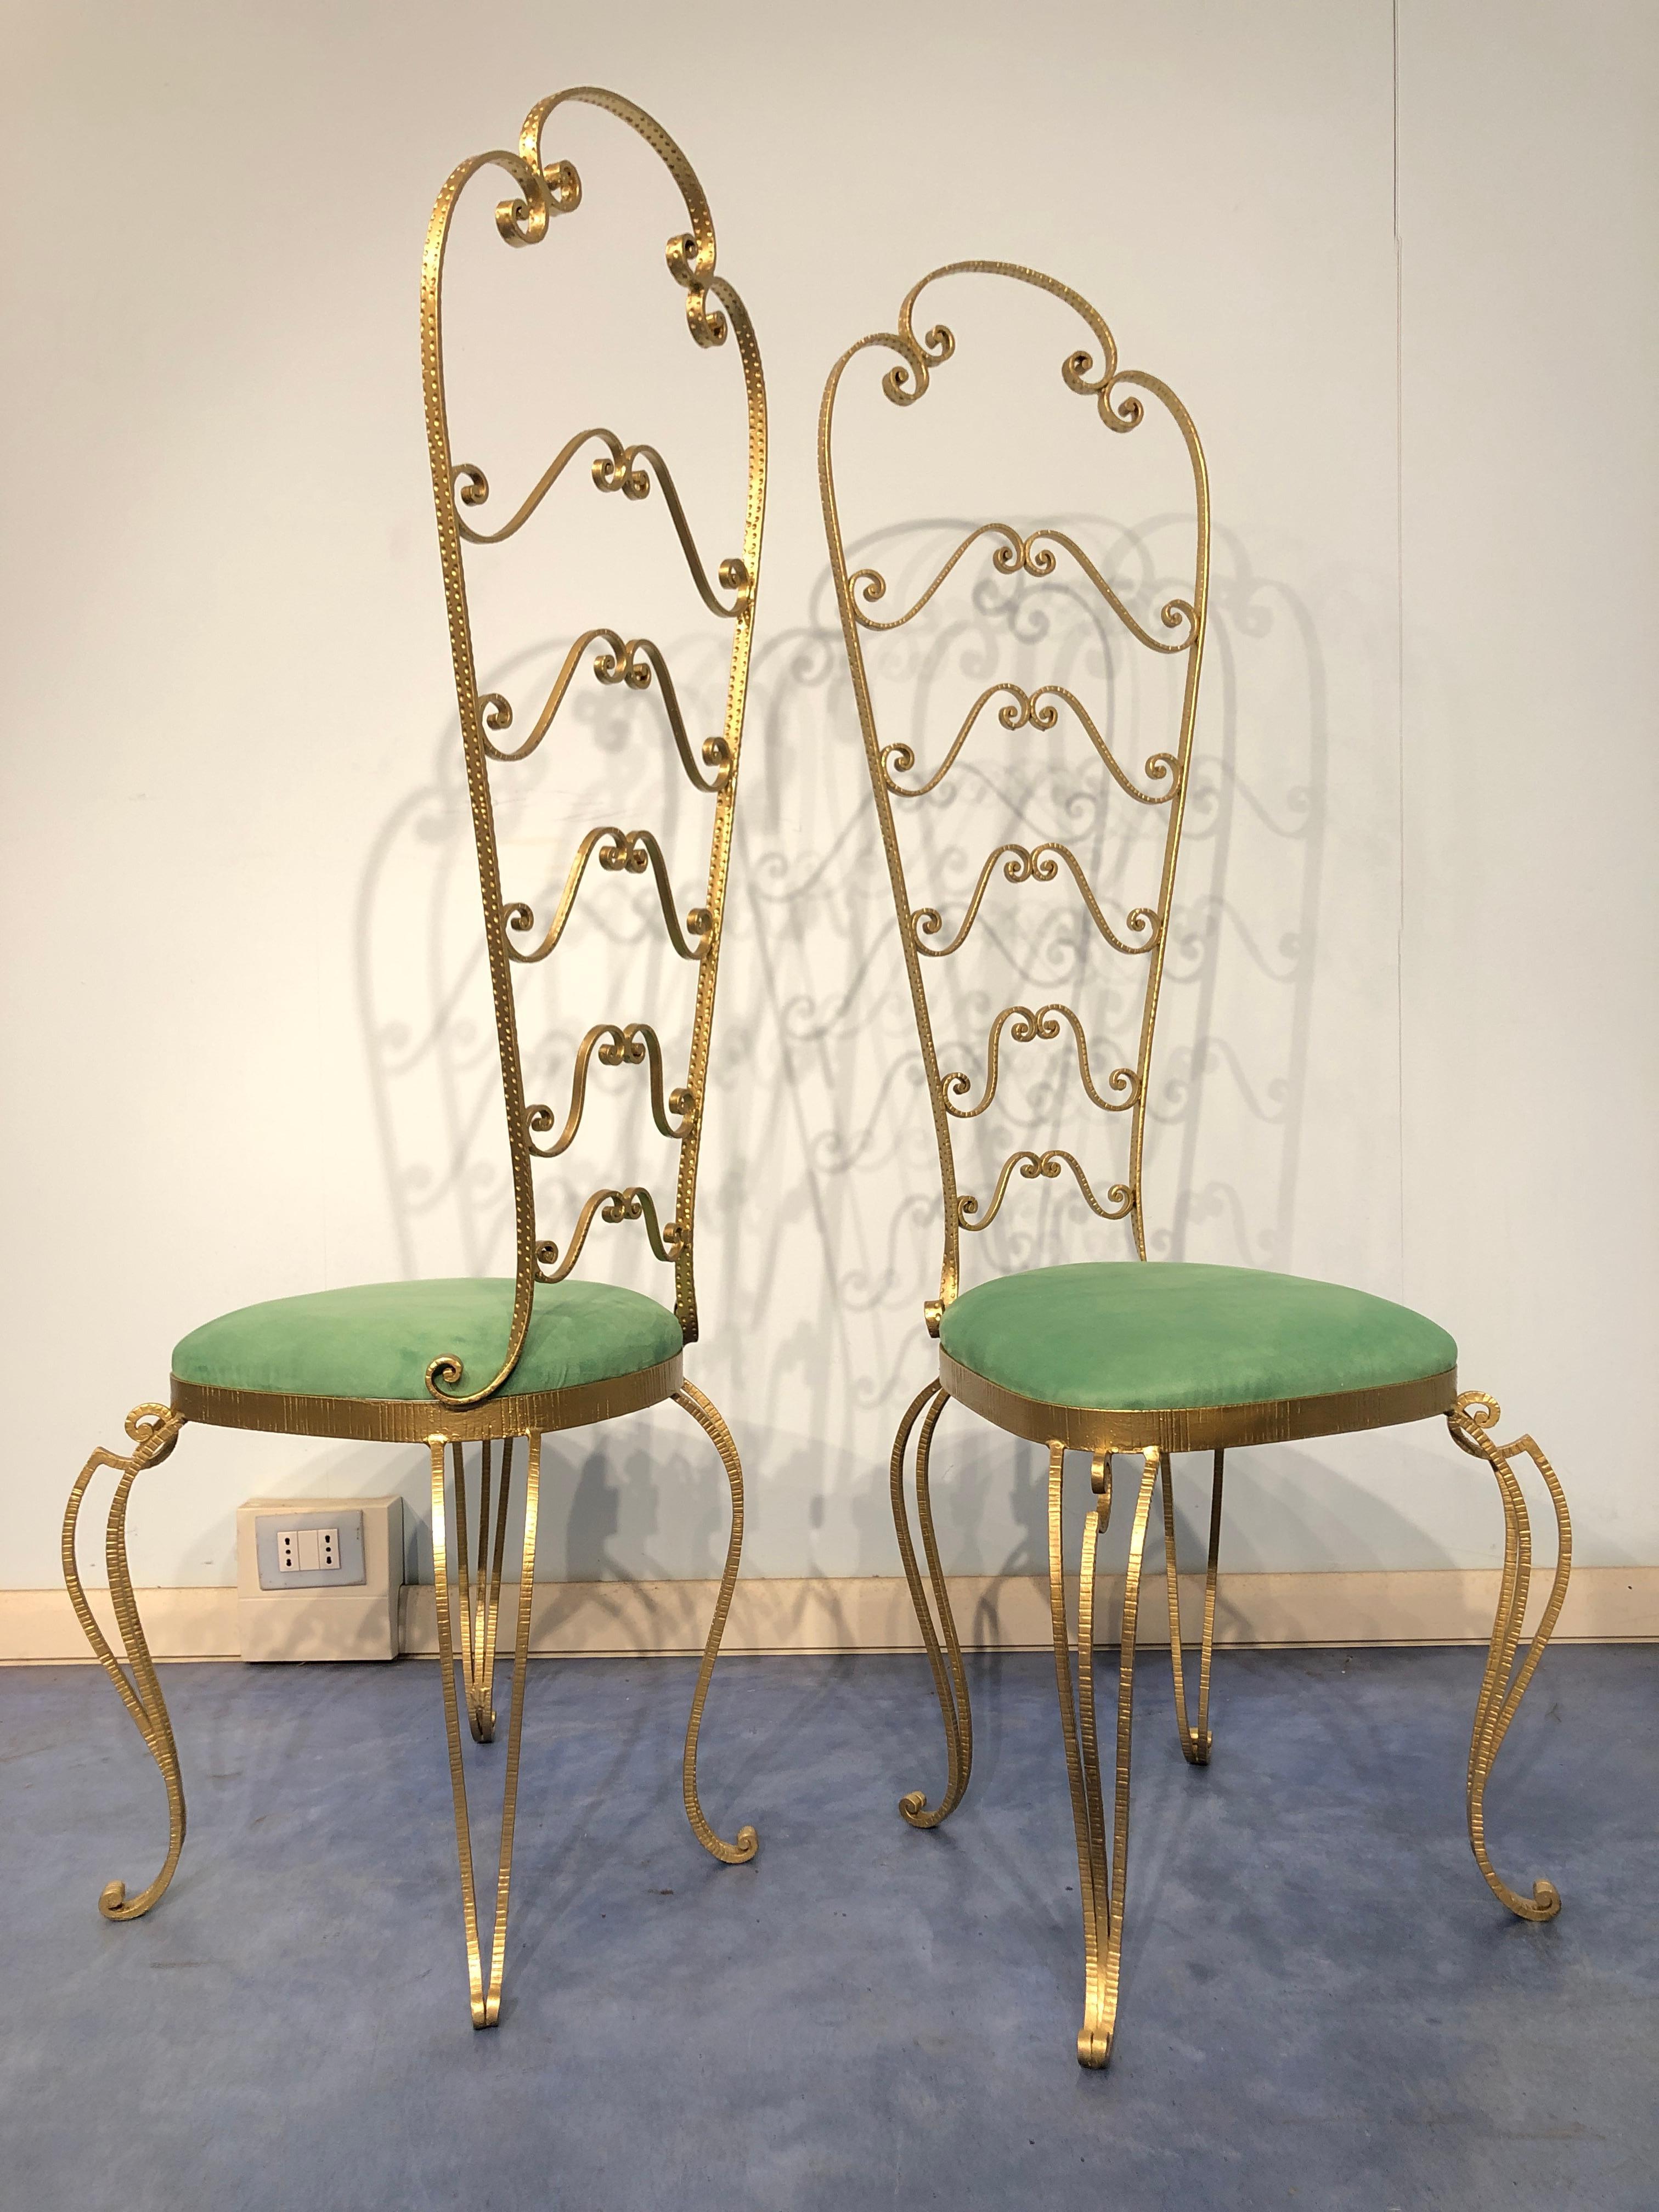 Gorgeous pair of Italian Mid-Century Modern Luigi Colli vanity chairs in gold gilded iron with high backrest.
Pea-green microfiber fabric seat, in excellent condition. Ready to use.